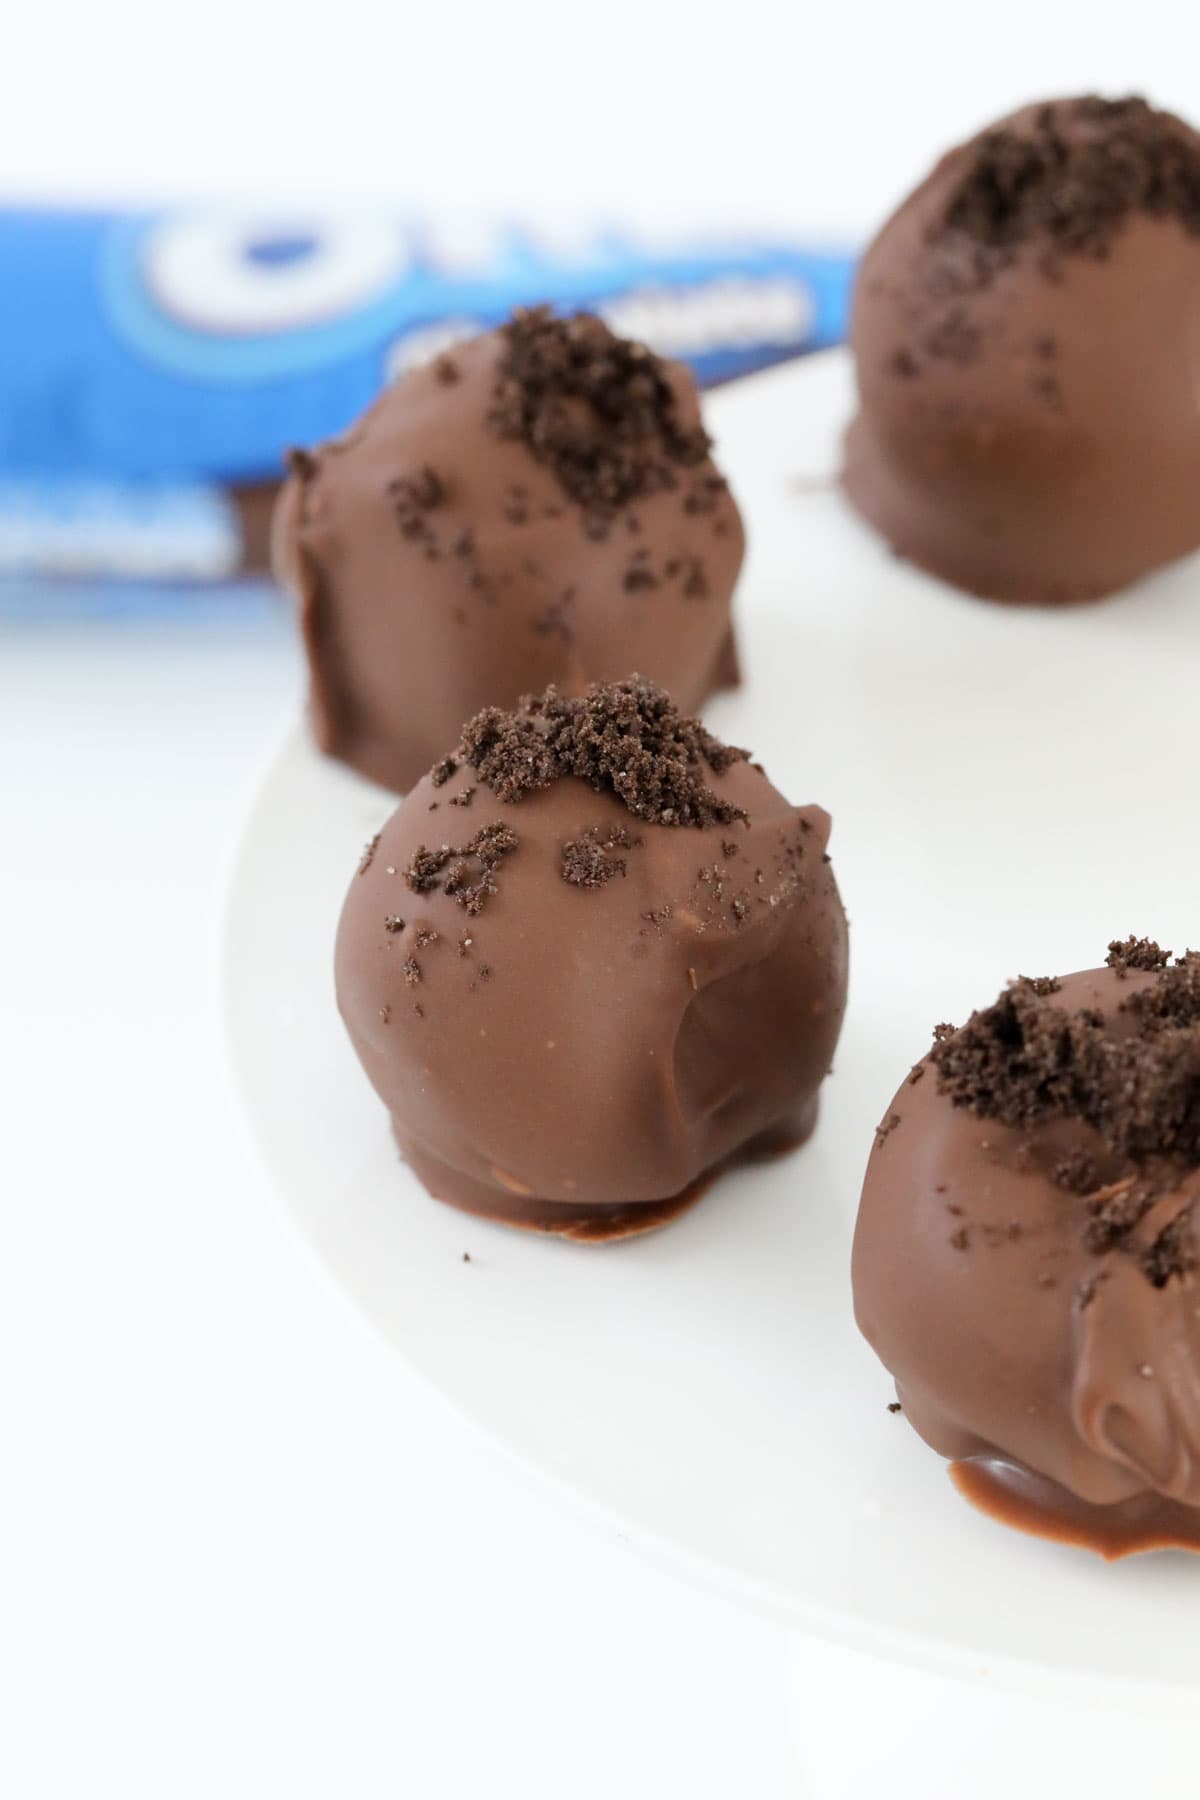 Chocolate coated balls with a Oreo crumb.